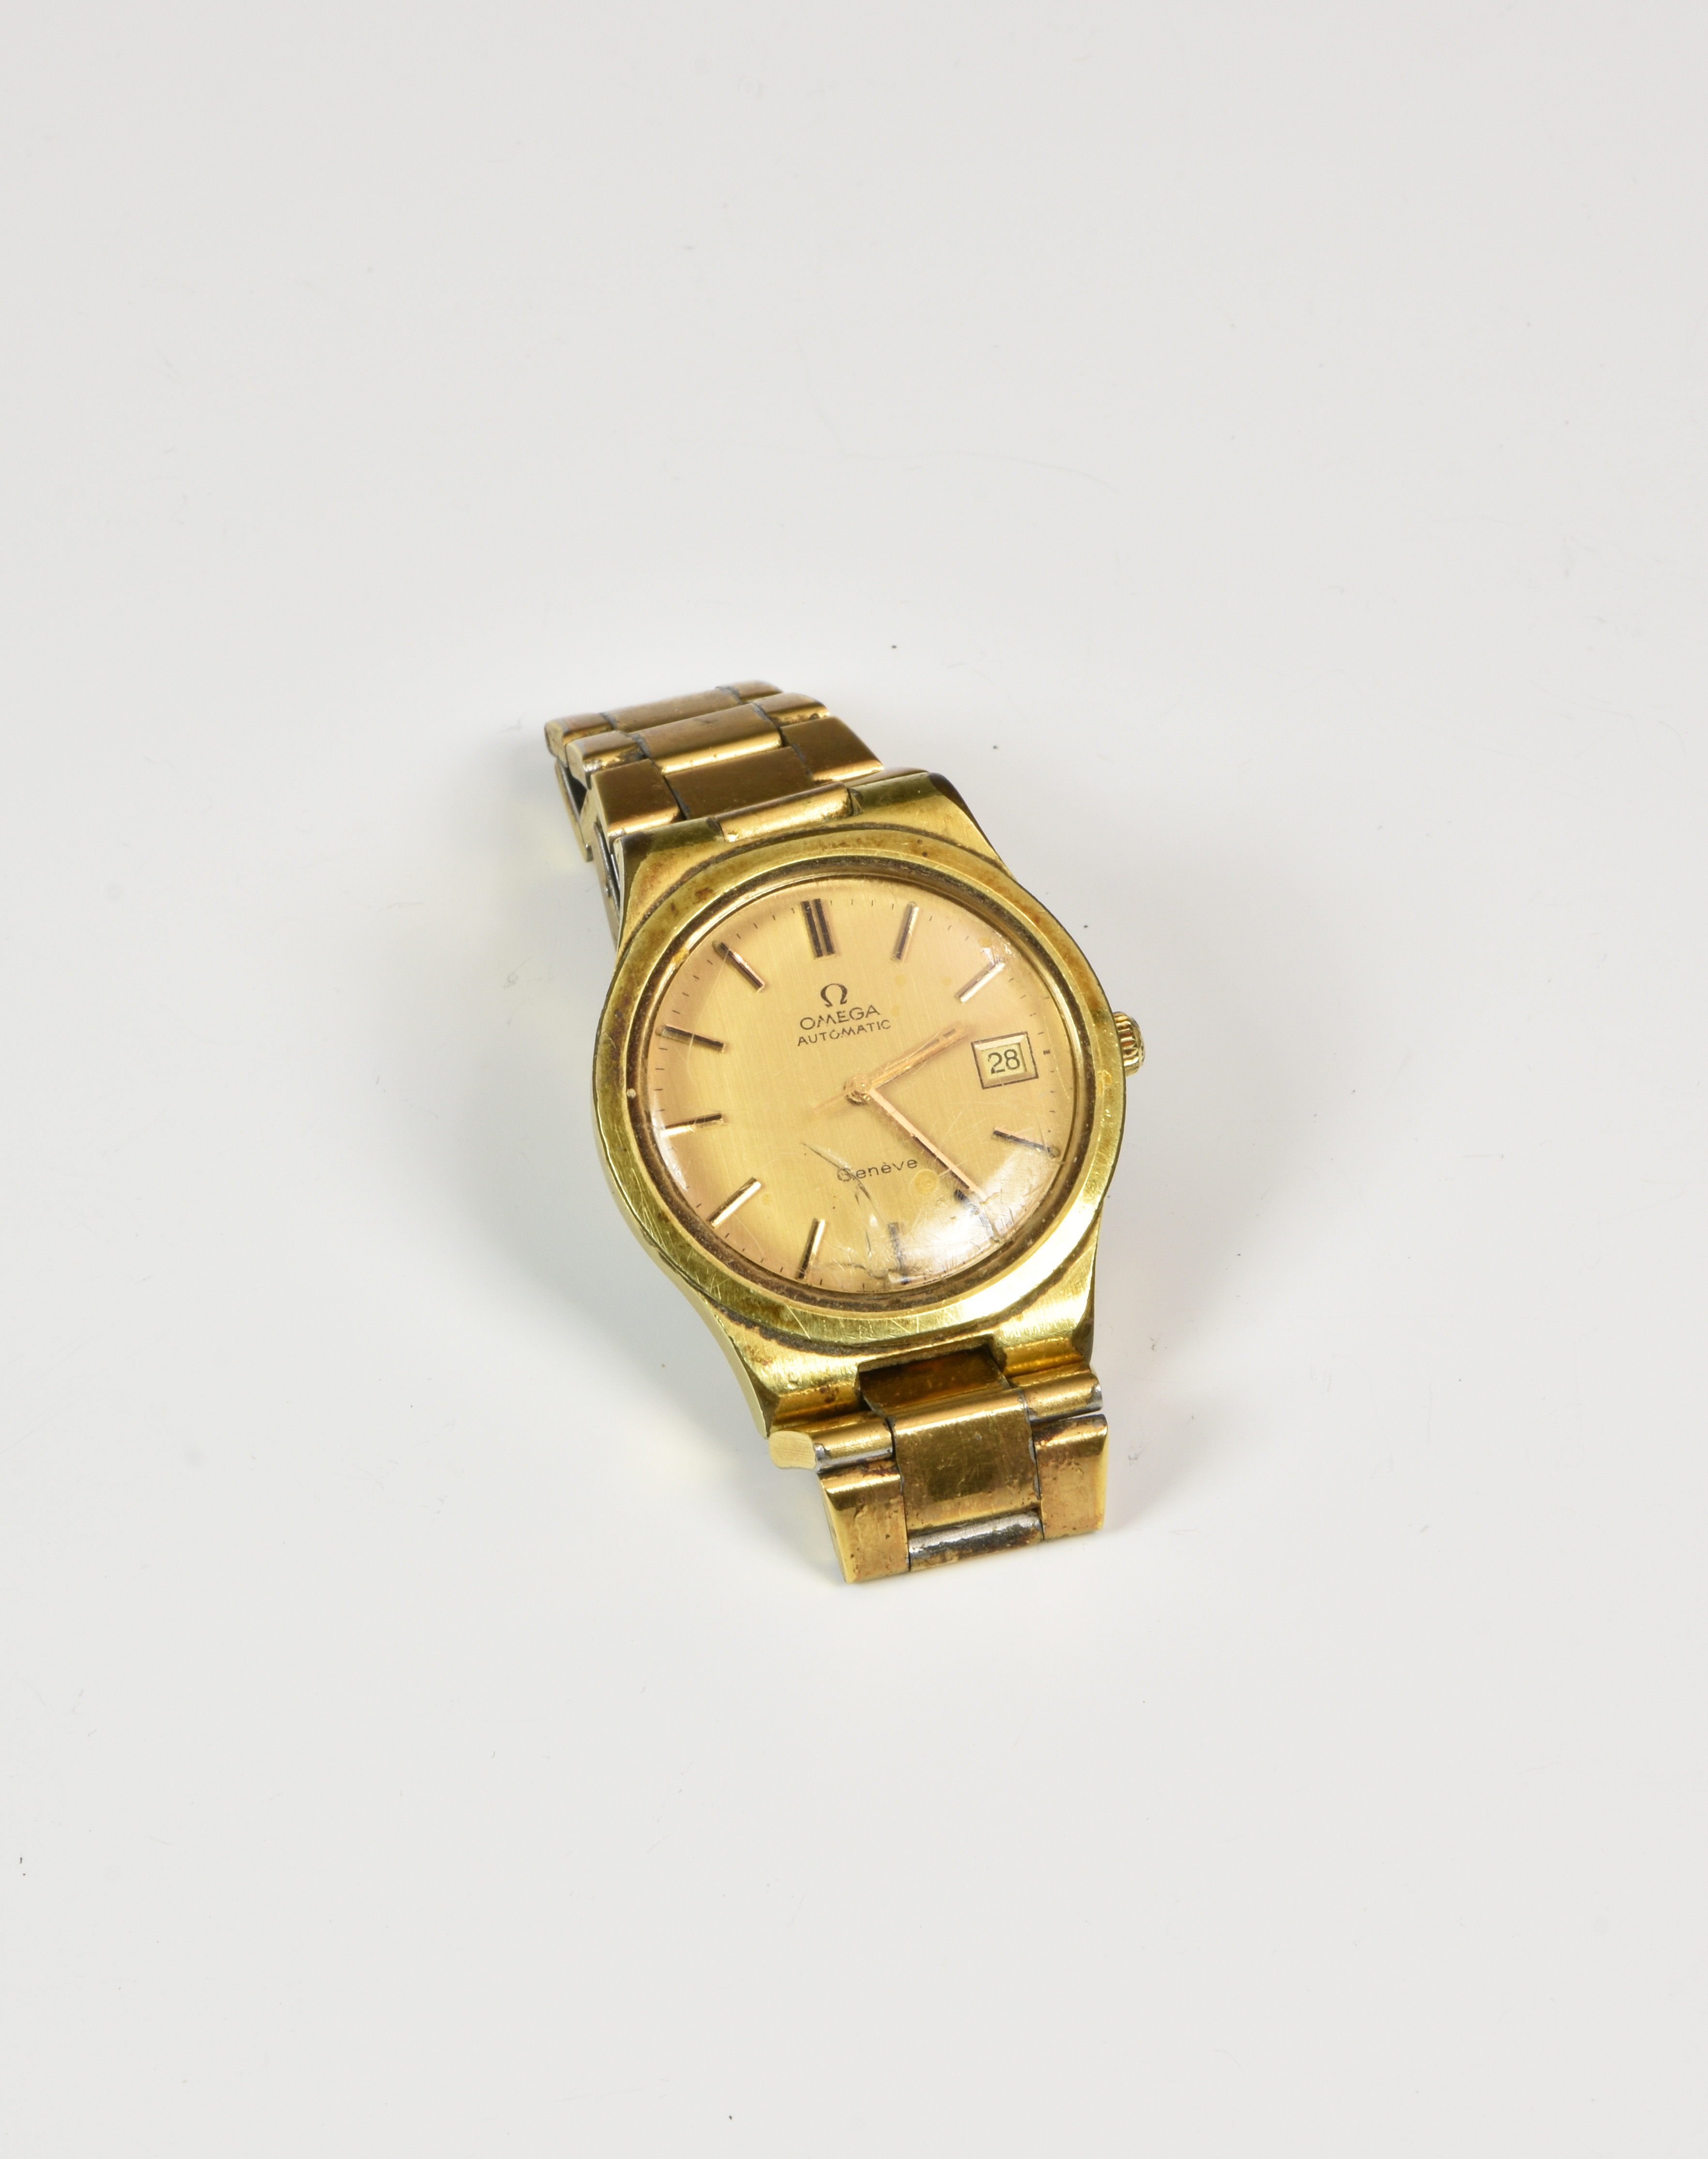 An Omega Automatic gold plated gents manual wind wrist watch c.1973, ref. 1660173, with signed